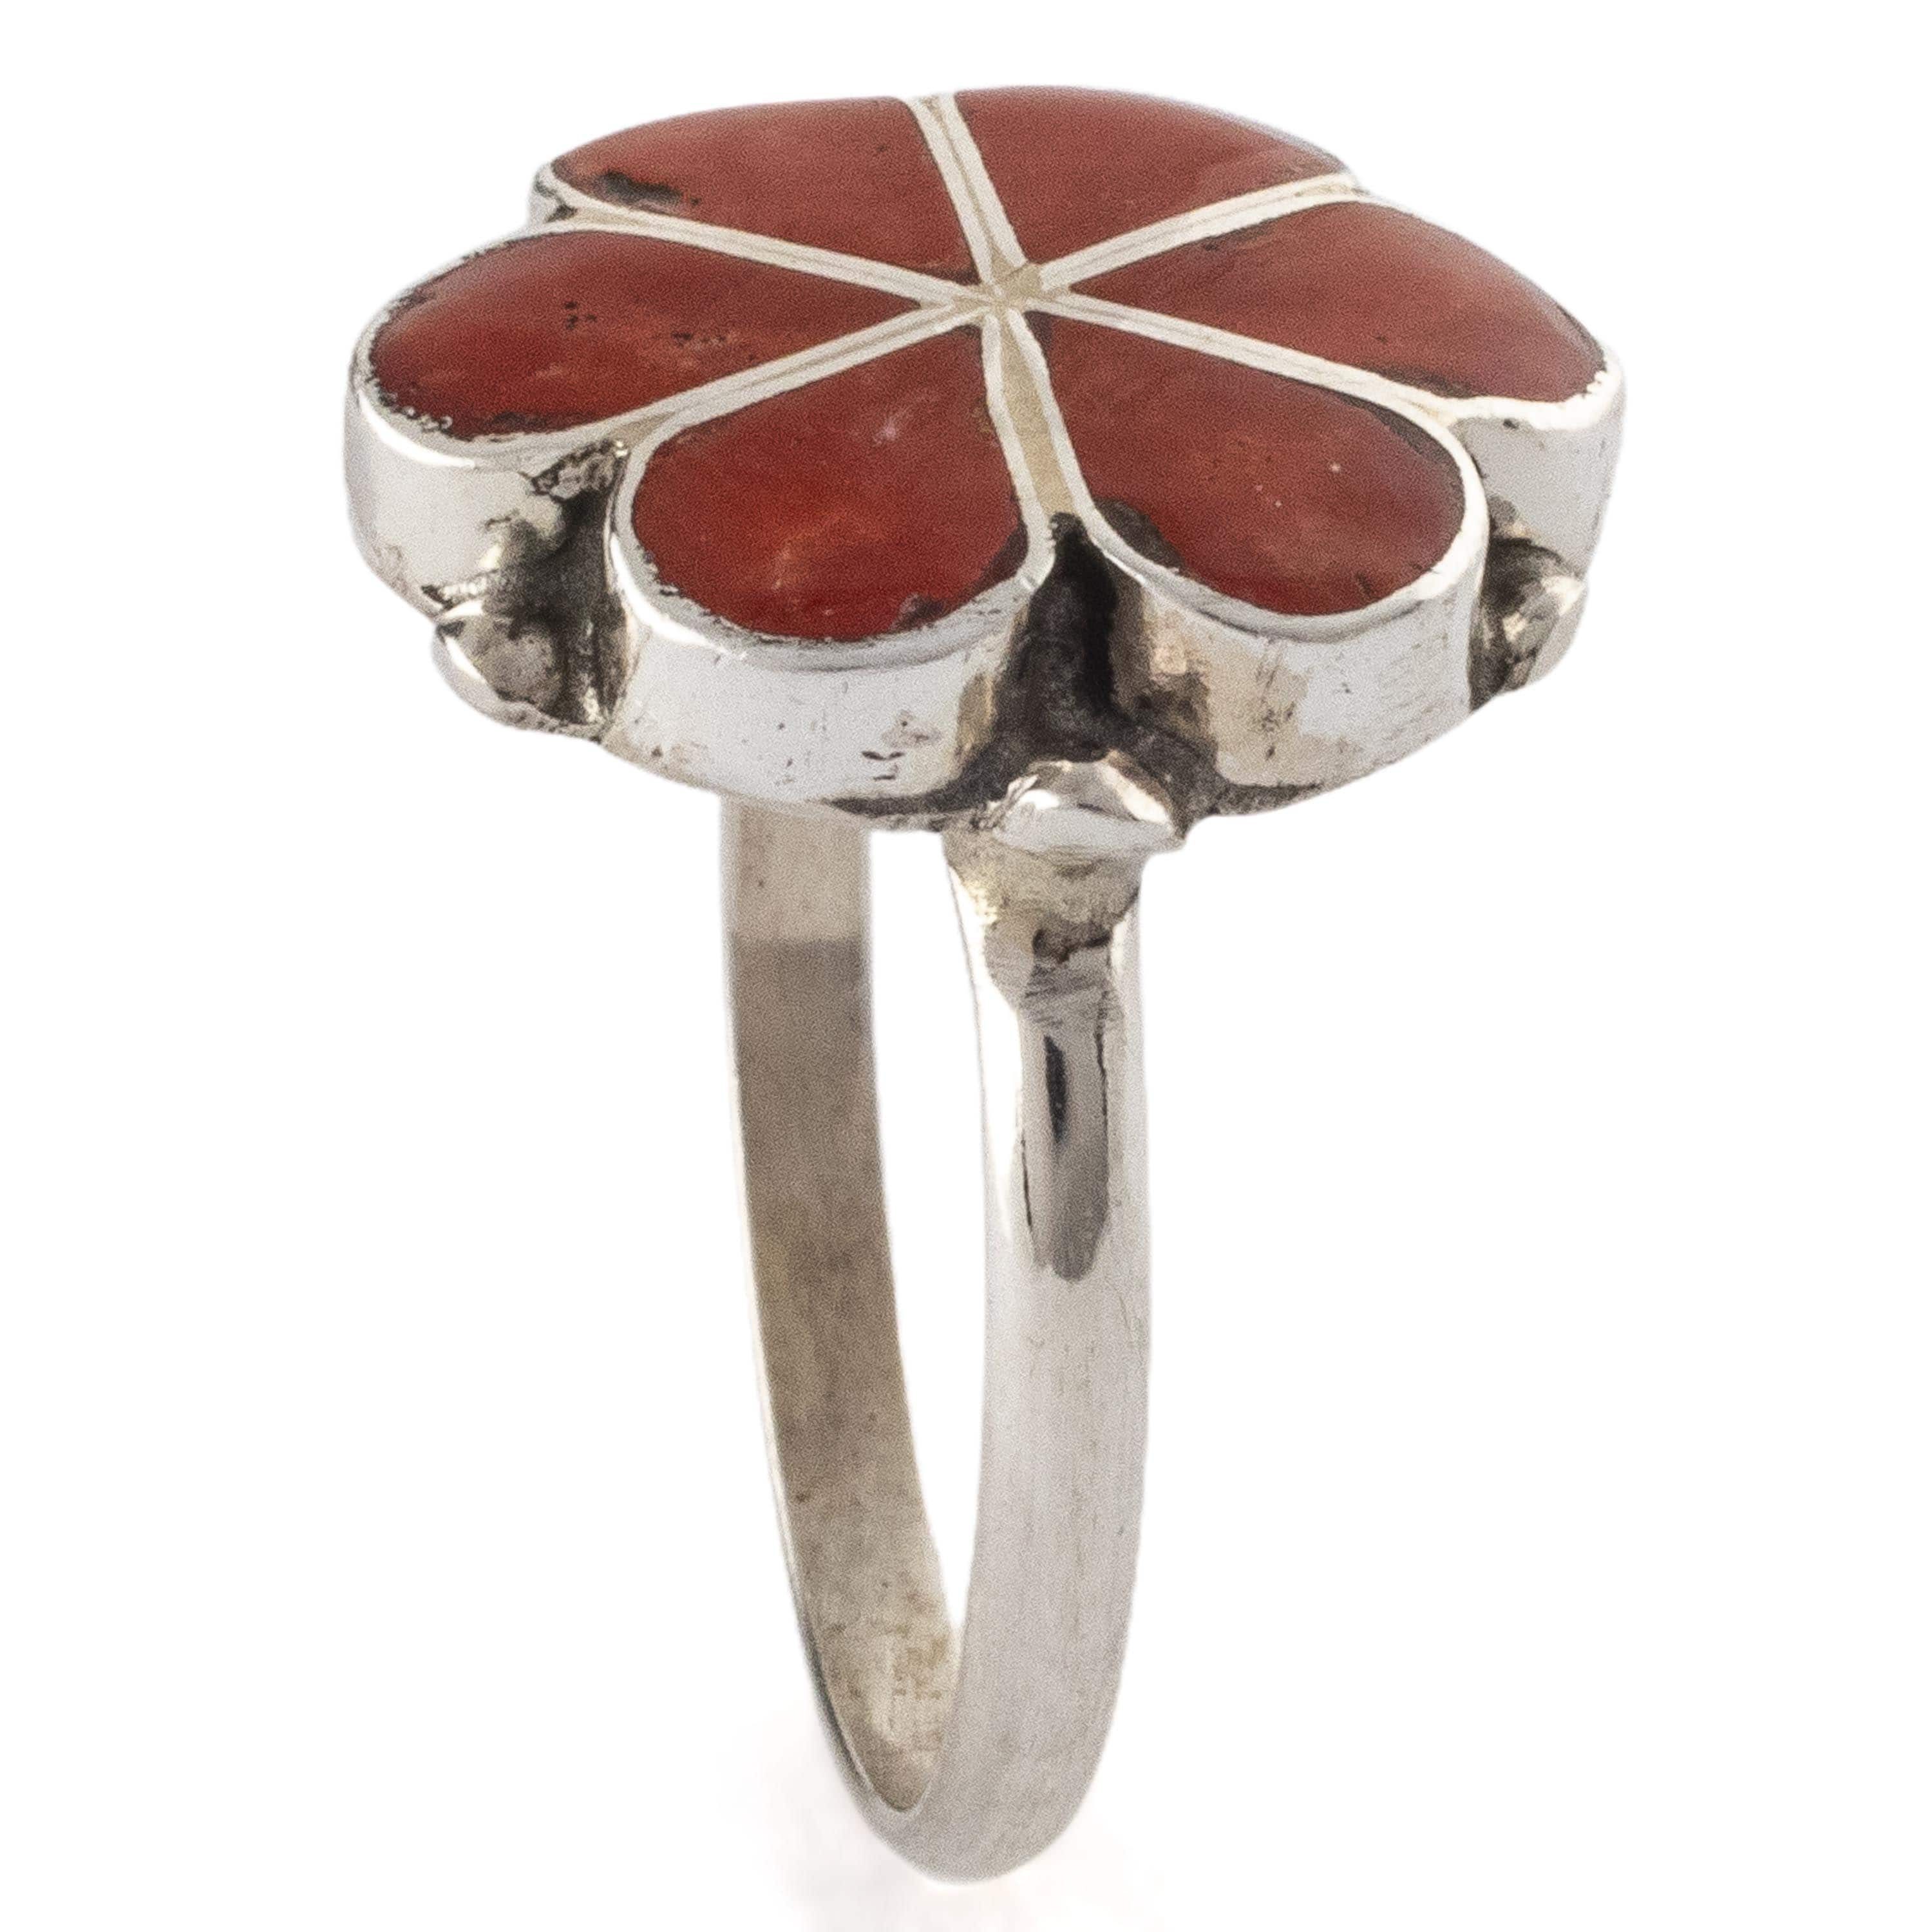 Kalifano Native American Jewelry 6.5 Bernadette Hattie Zuni Coral Flower Inlay USA Native American Made 925 Sterling Silver Ring NAR250.008.65